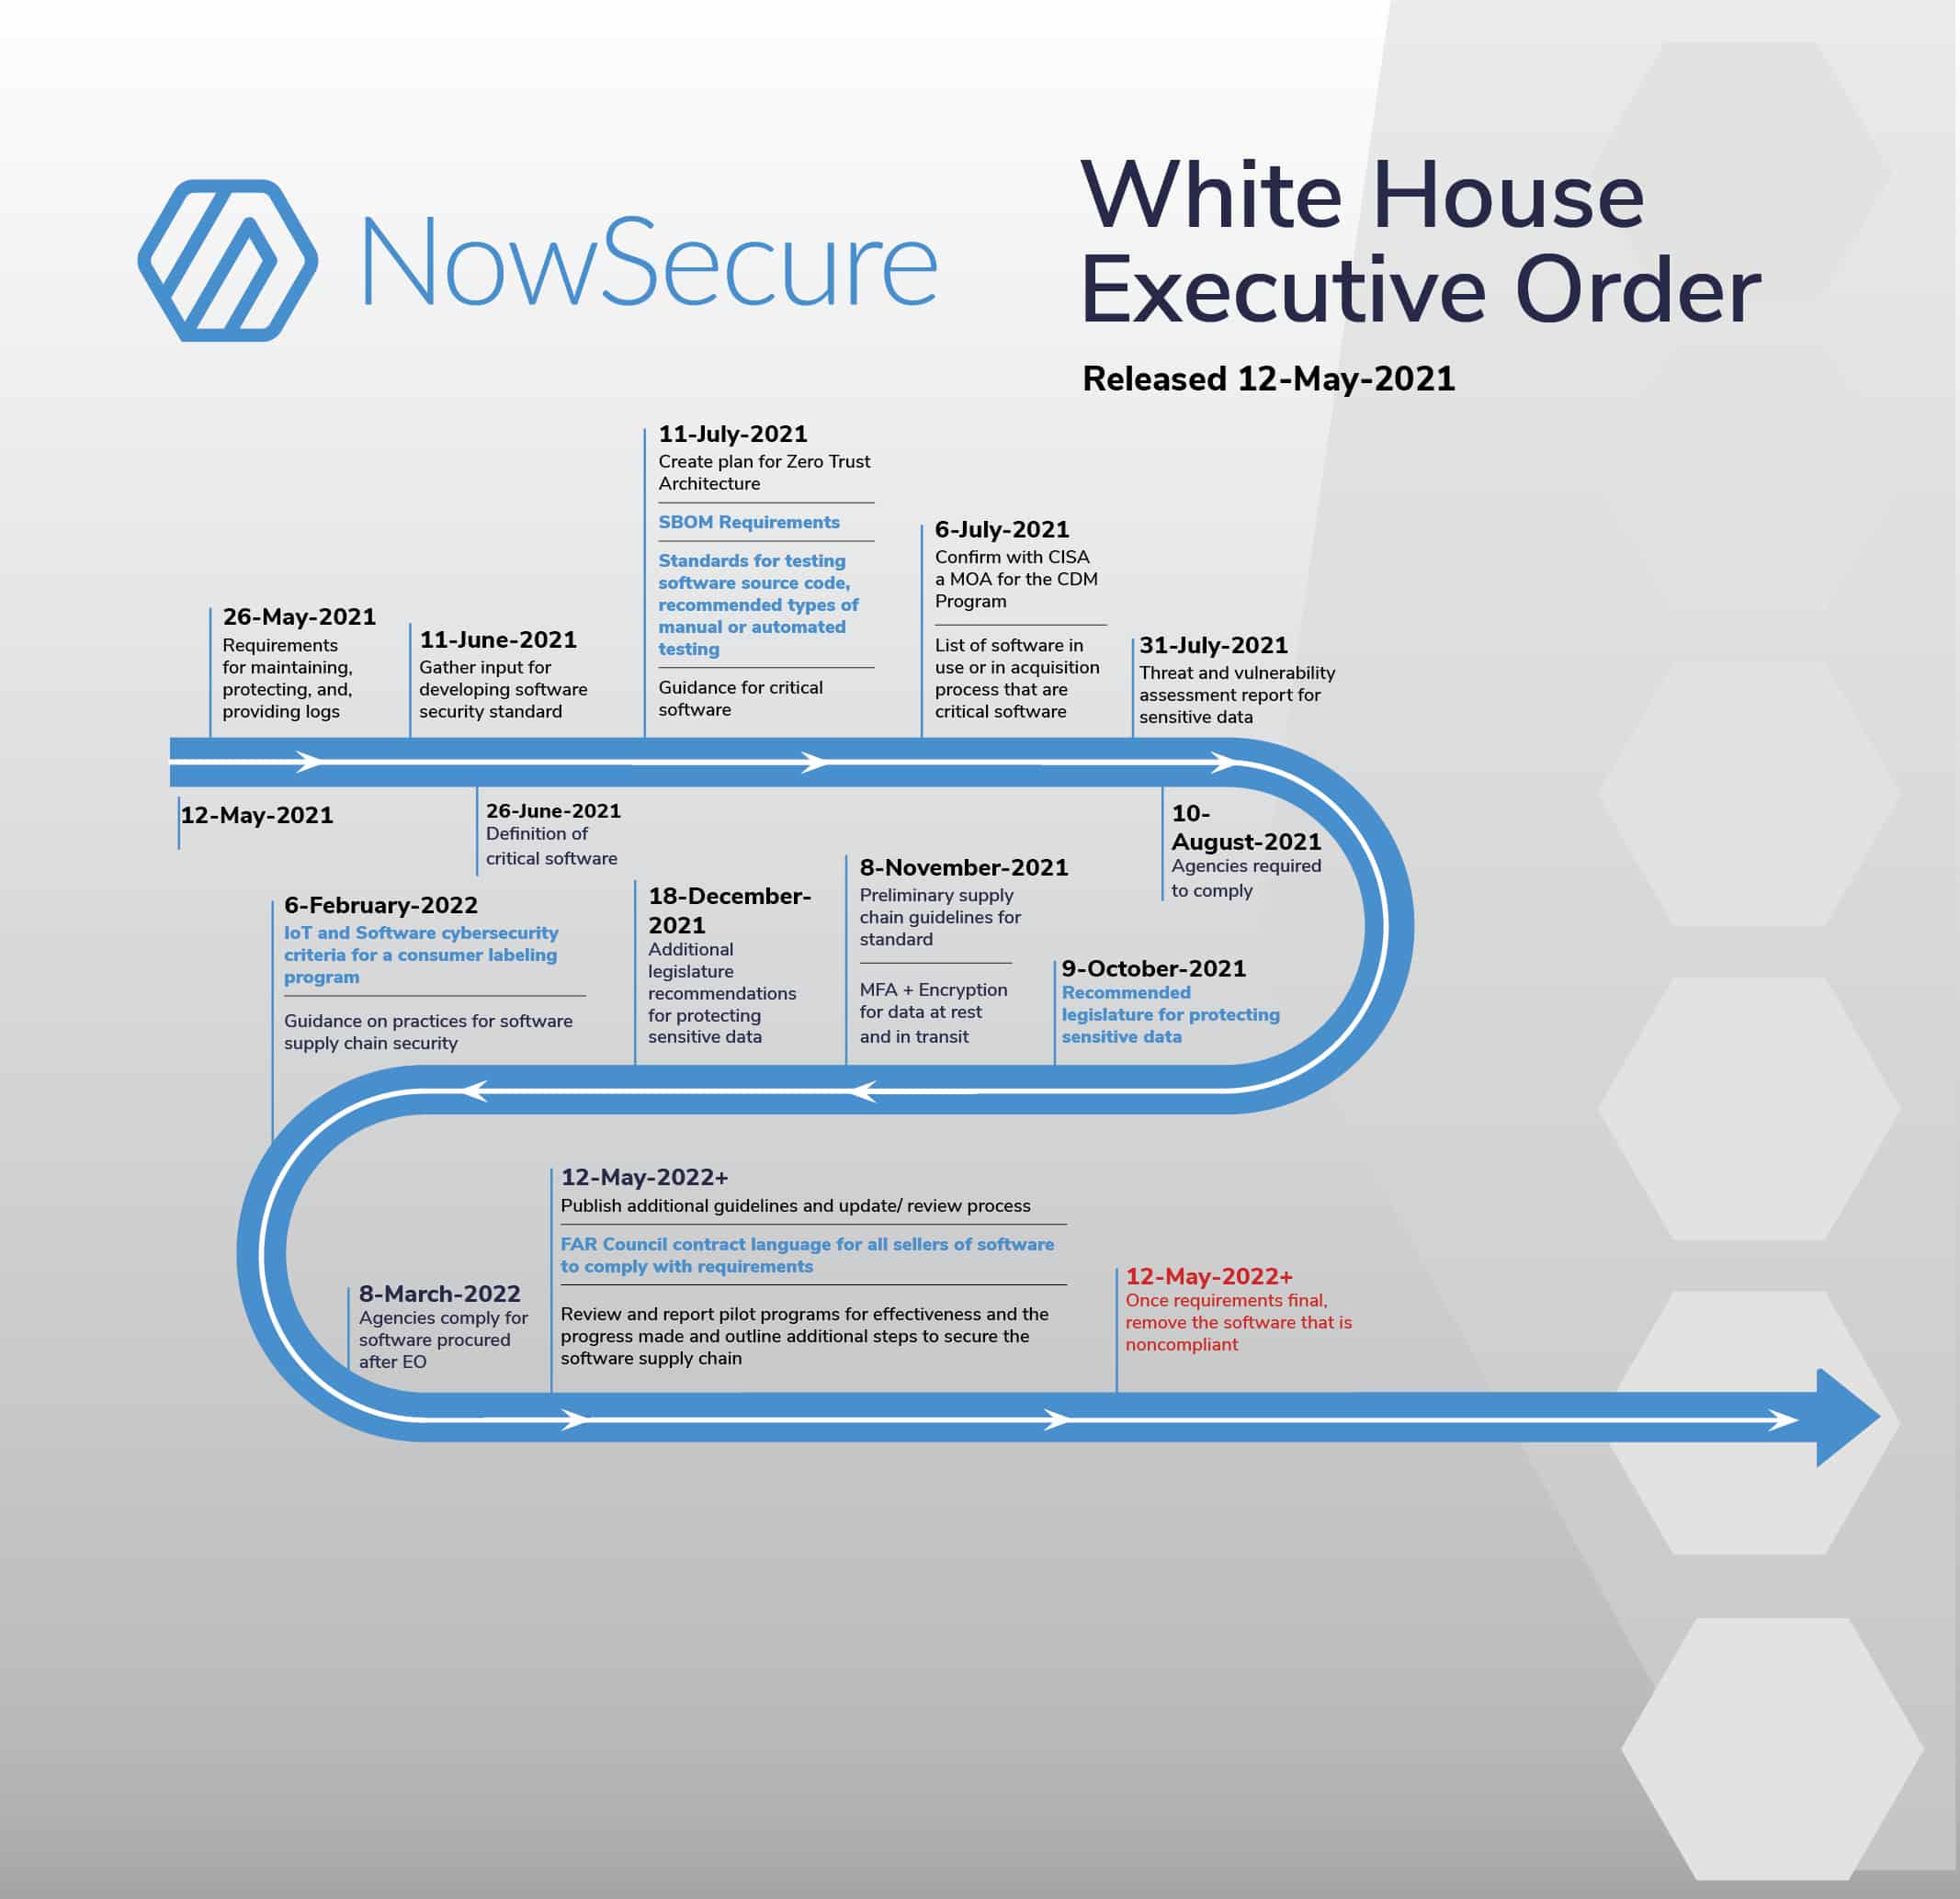 Cybersecurity executive order implementation timeline